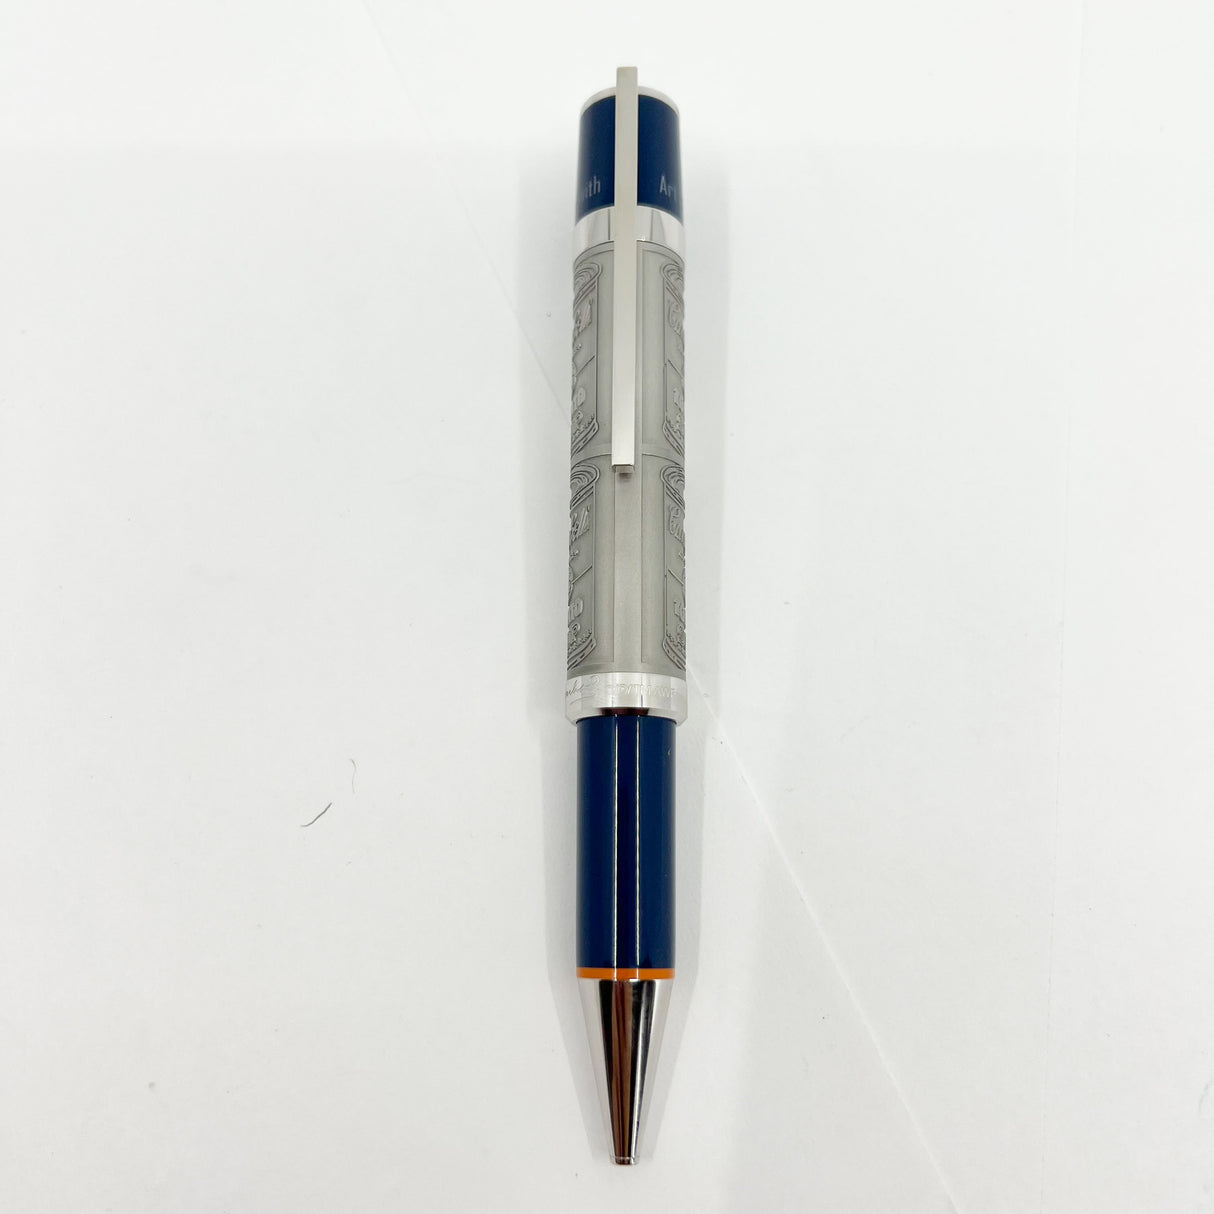 Montblanc Andy Warhol Special Edition Ballpoint Pen